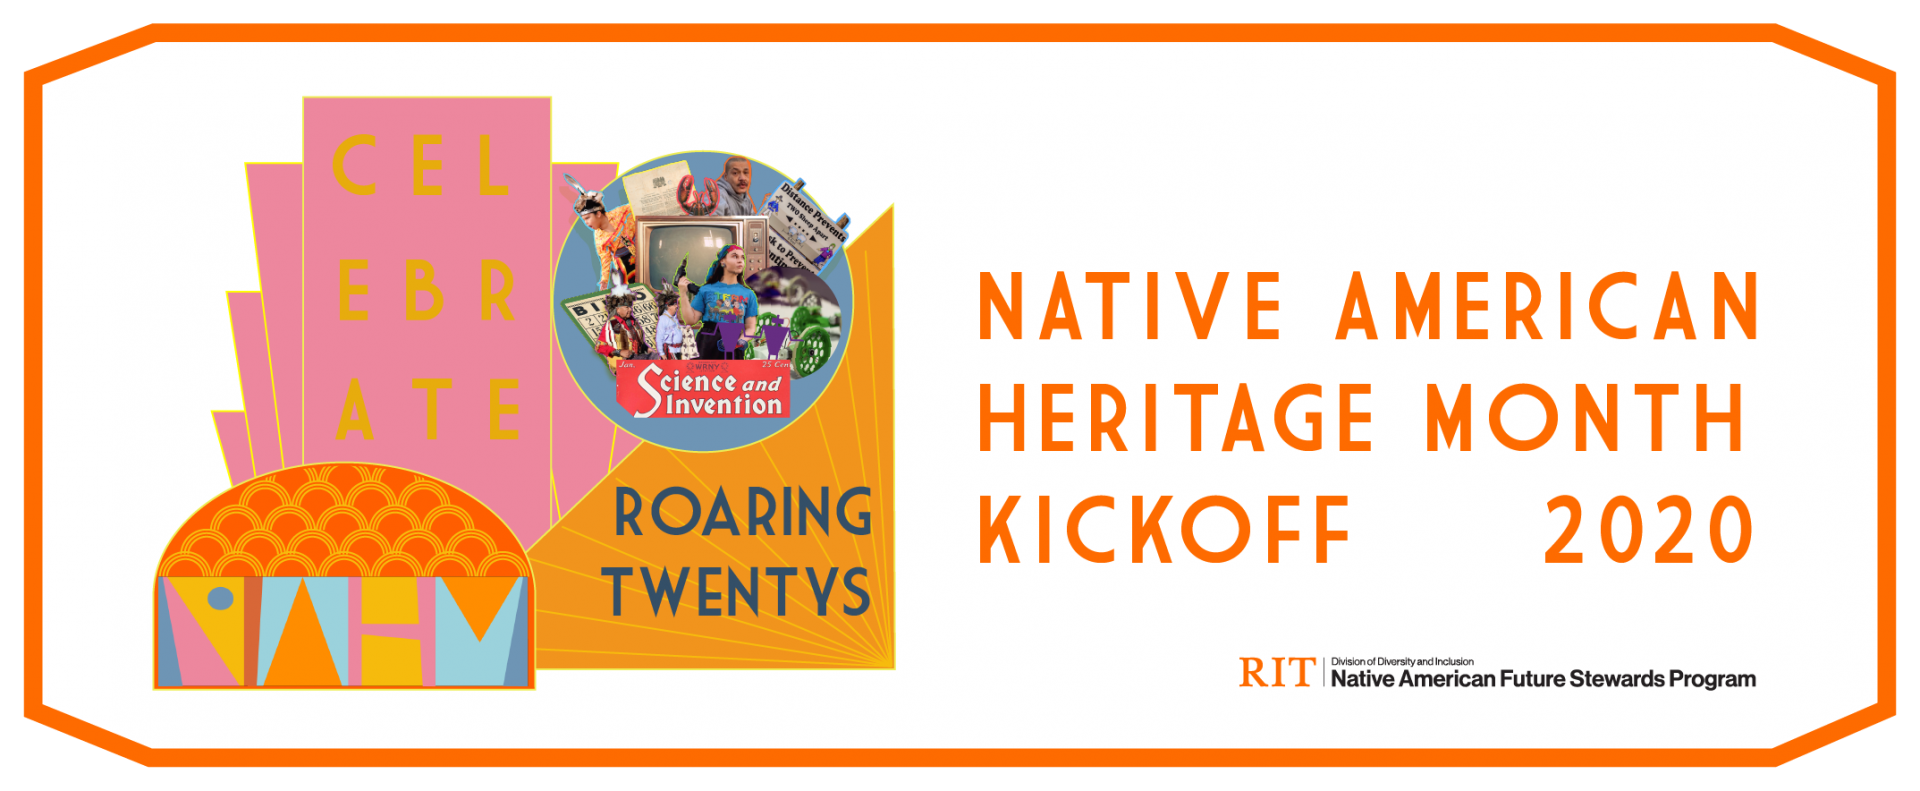 Graphic designs with pink rectangle with the words celebrate behind images of a yellow triangle with the words "roarding twentys... but indigenous." The 4 letters NAHM sits in front within an orange dome shape. The text Native American Heritage Month Kickoff 2020 is to the right of the graphics. The DDI Future Stewards Program lockup sits below.